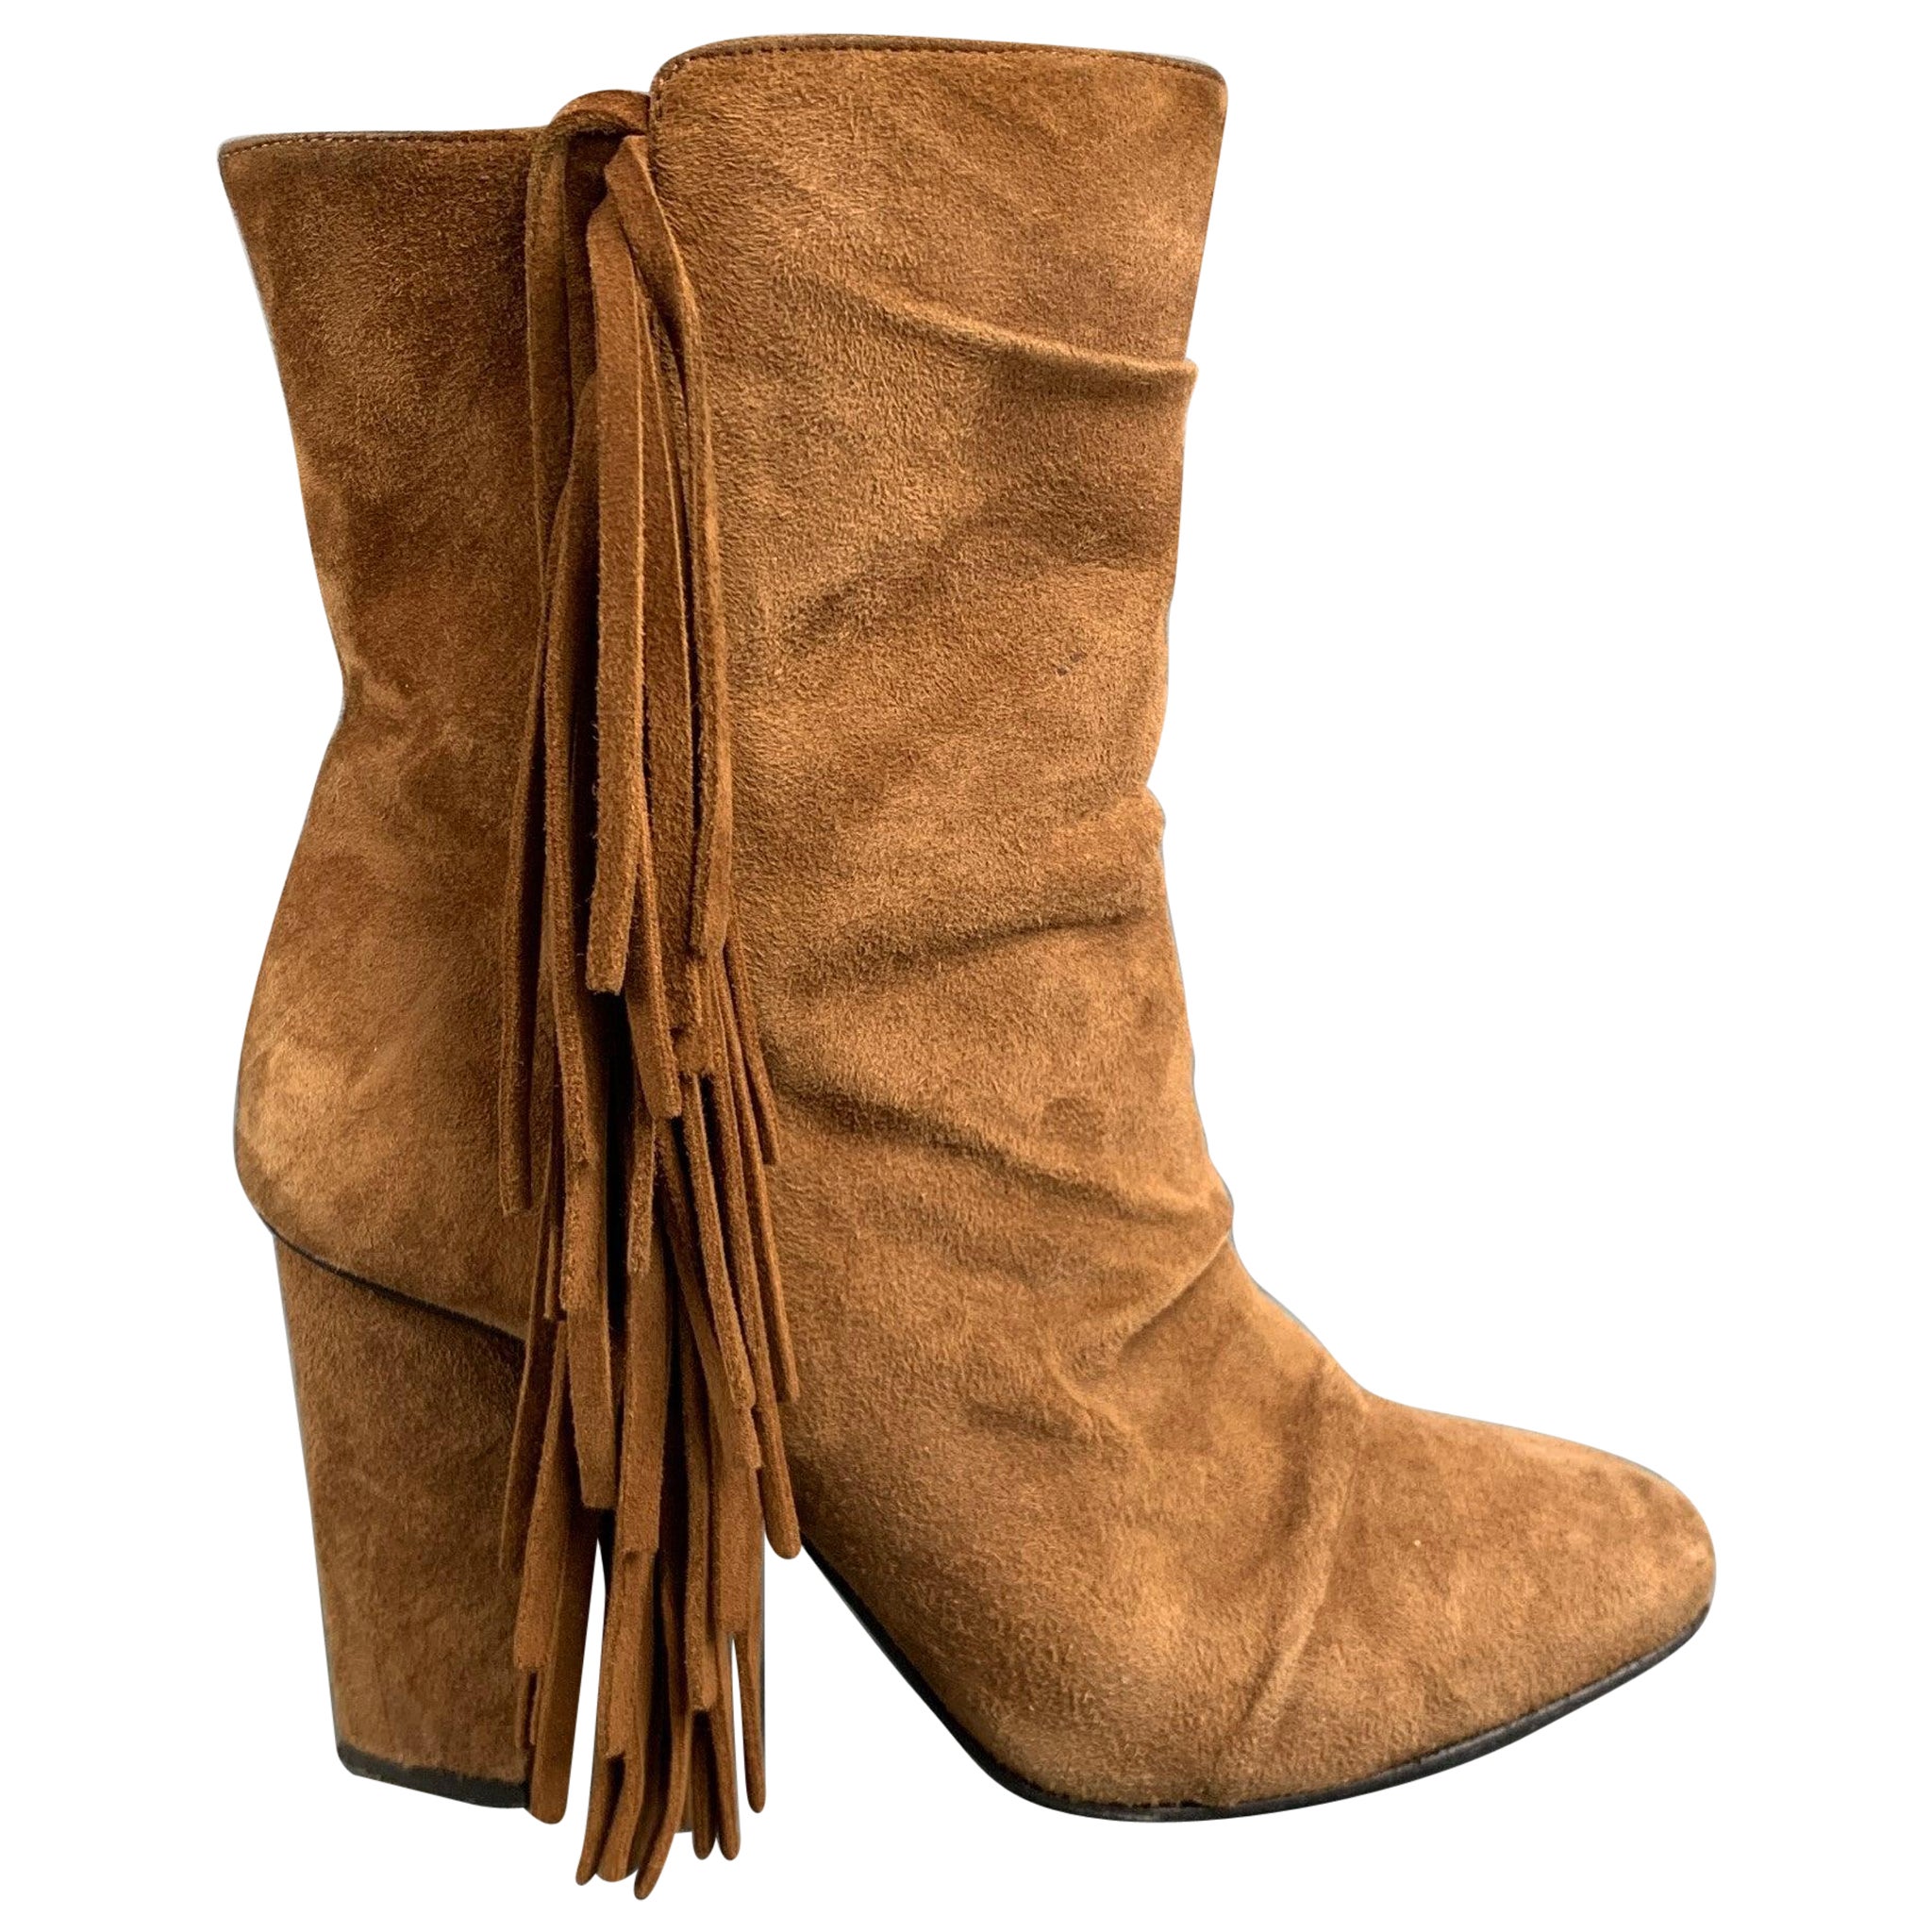 GIUSEPPE ZANOTTI Size 7.5 Brown Suede Fringe Chunky heel Boots For Sale